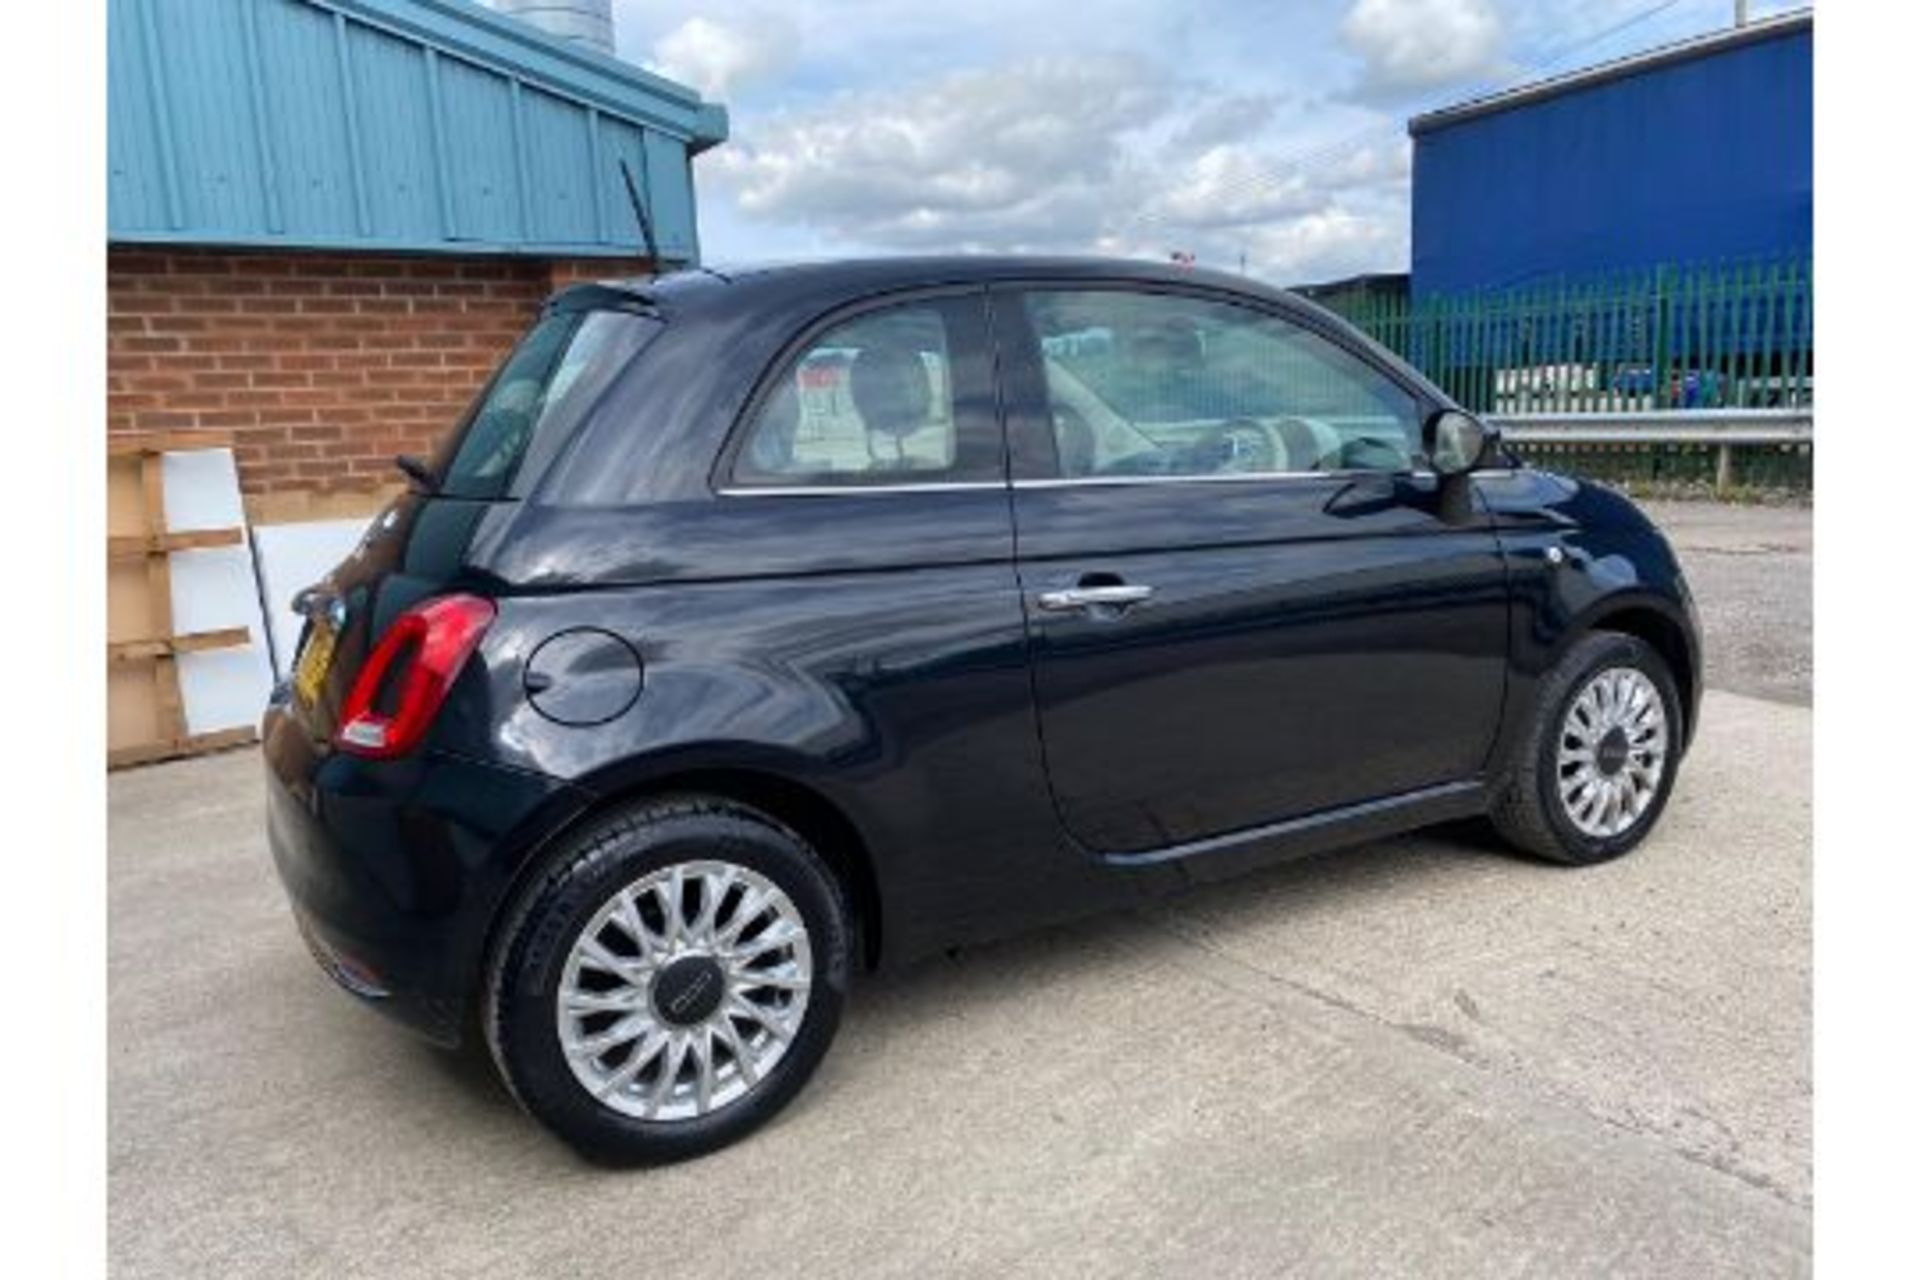 (Reserve Met) Fiat 500 1.2 Lounge - 2016 16 Reg - Parking Sensors - Panoramic Roof - ONLY 46K Miles - Image 5 of 25